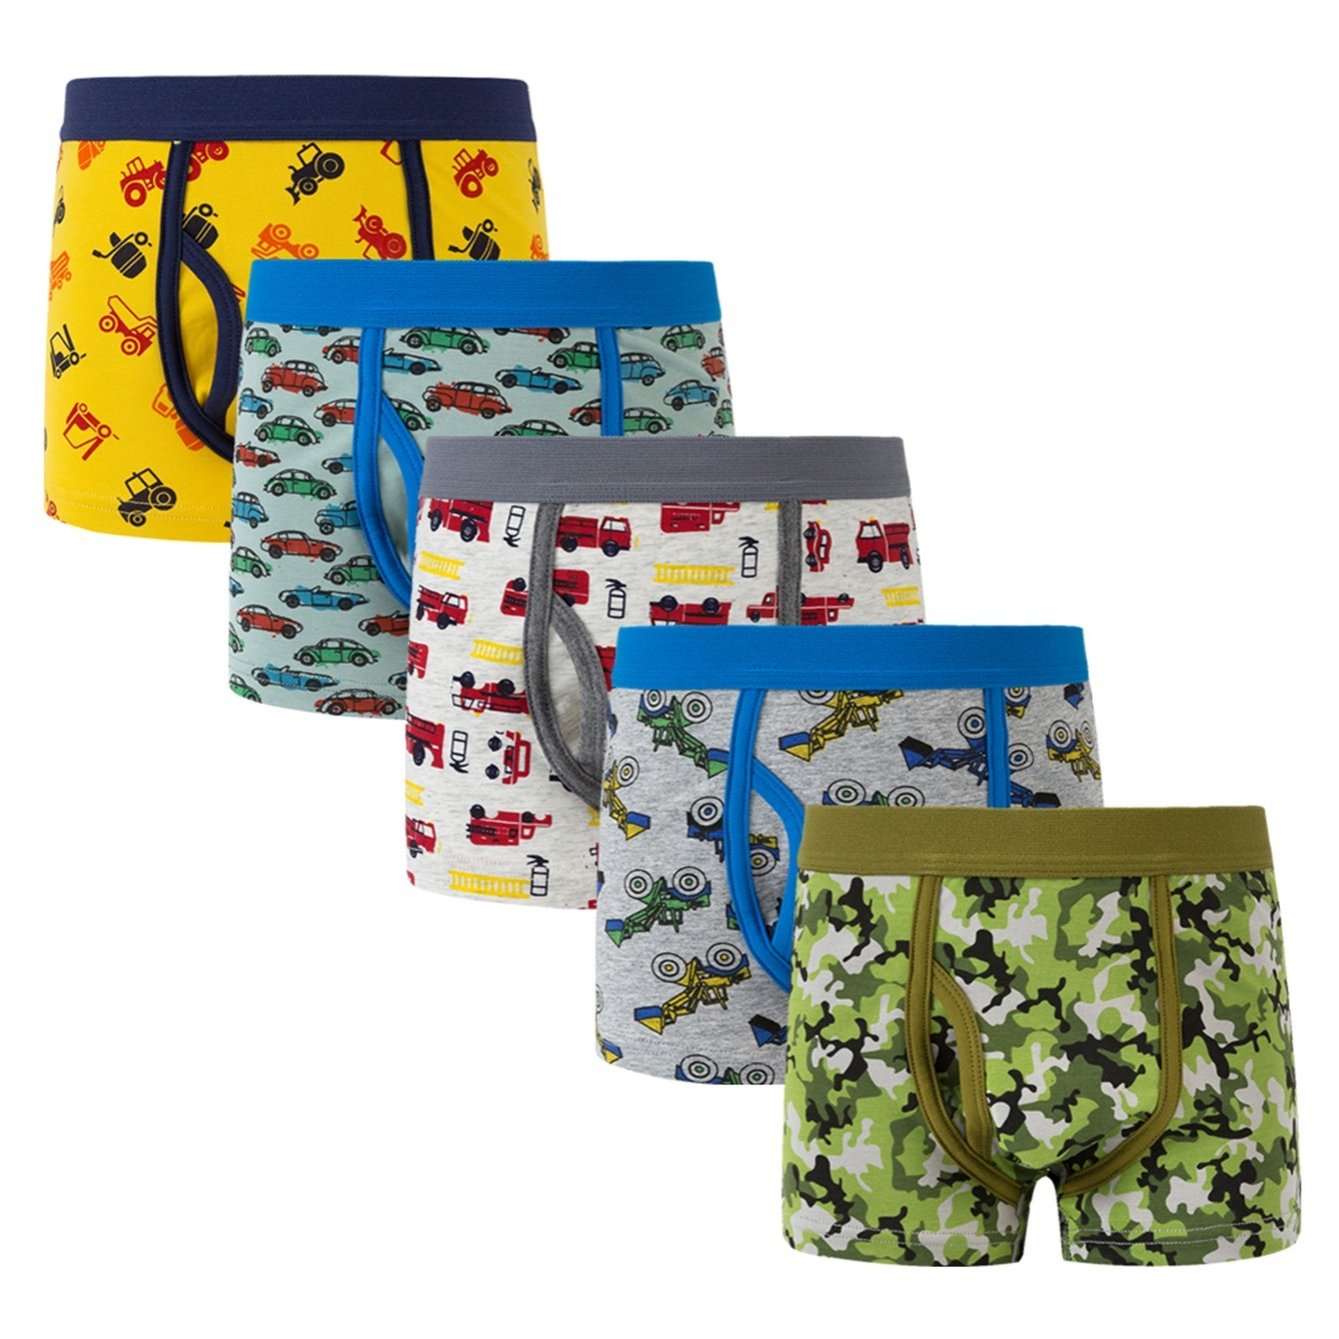 Breathable Cartoon Dinosaur Print Cotton Boxer Cute Boxer Briefs For Boys  Set Of 4 Underwear For Babies And Kids 221205 From Deng08, $11.26